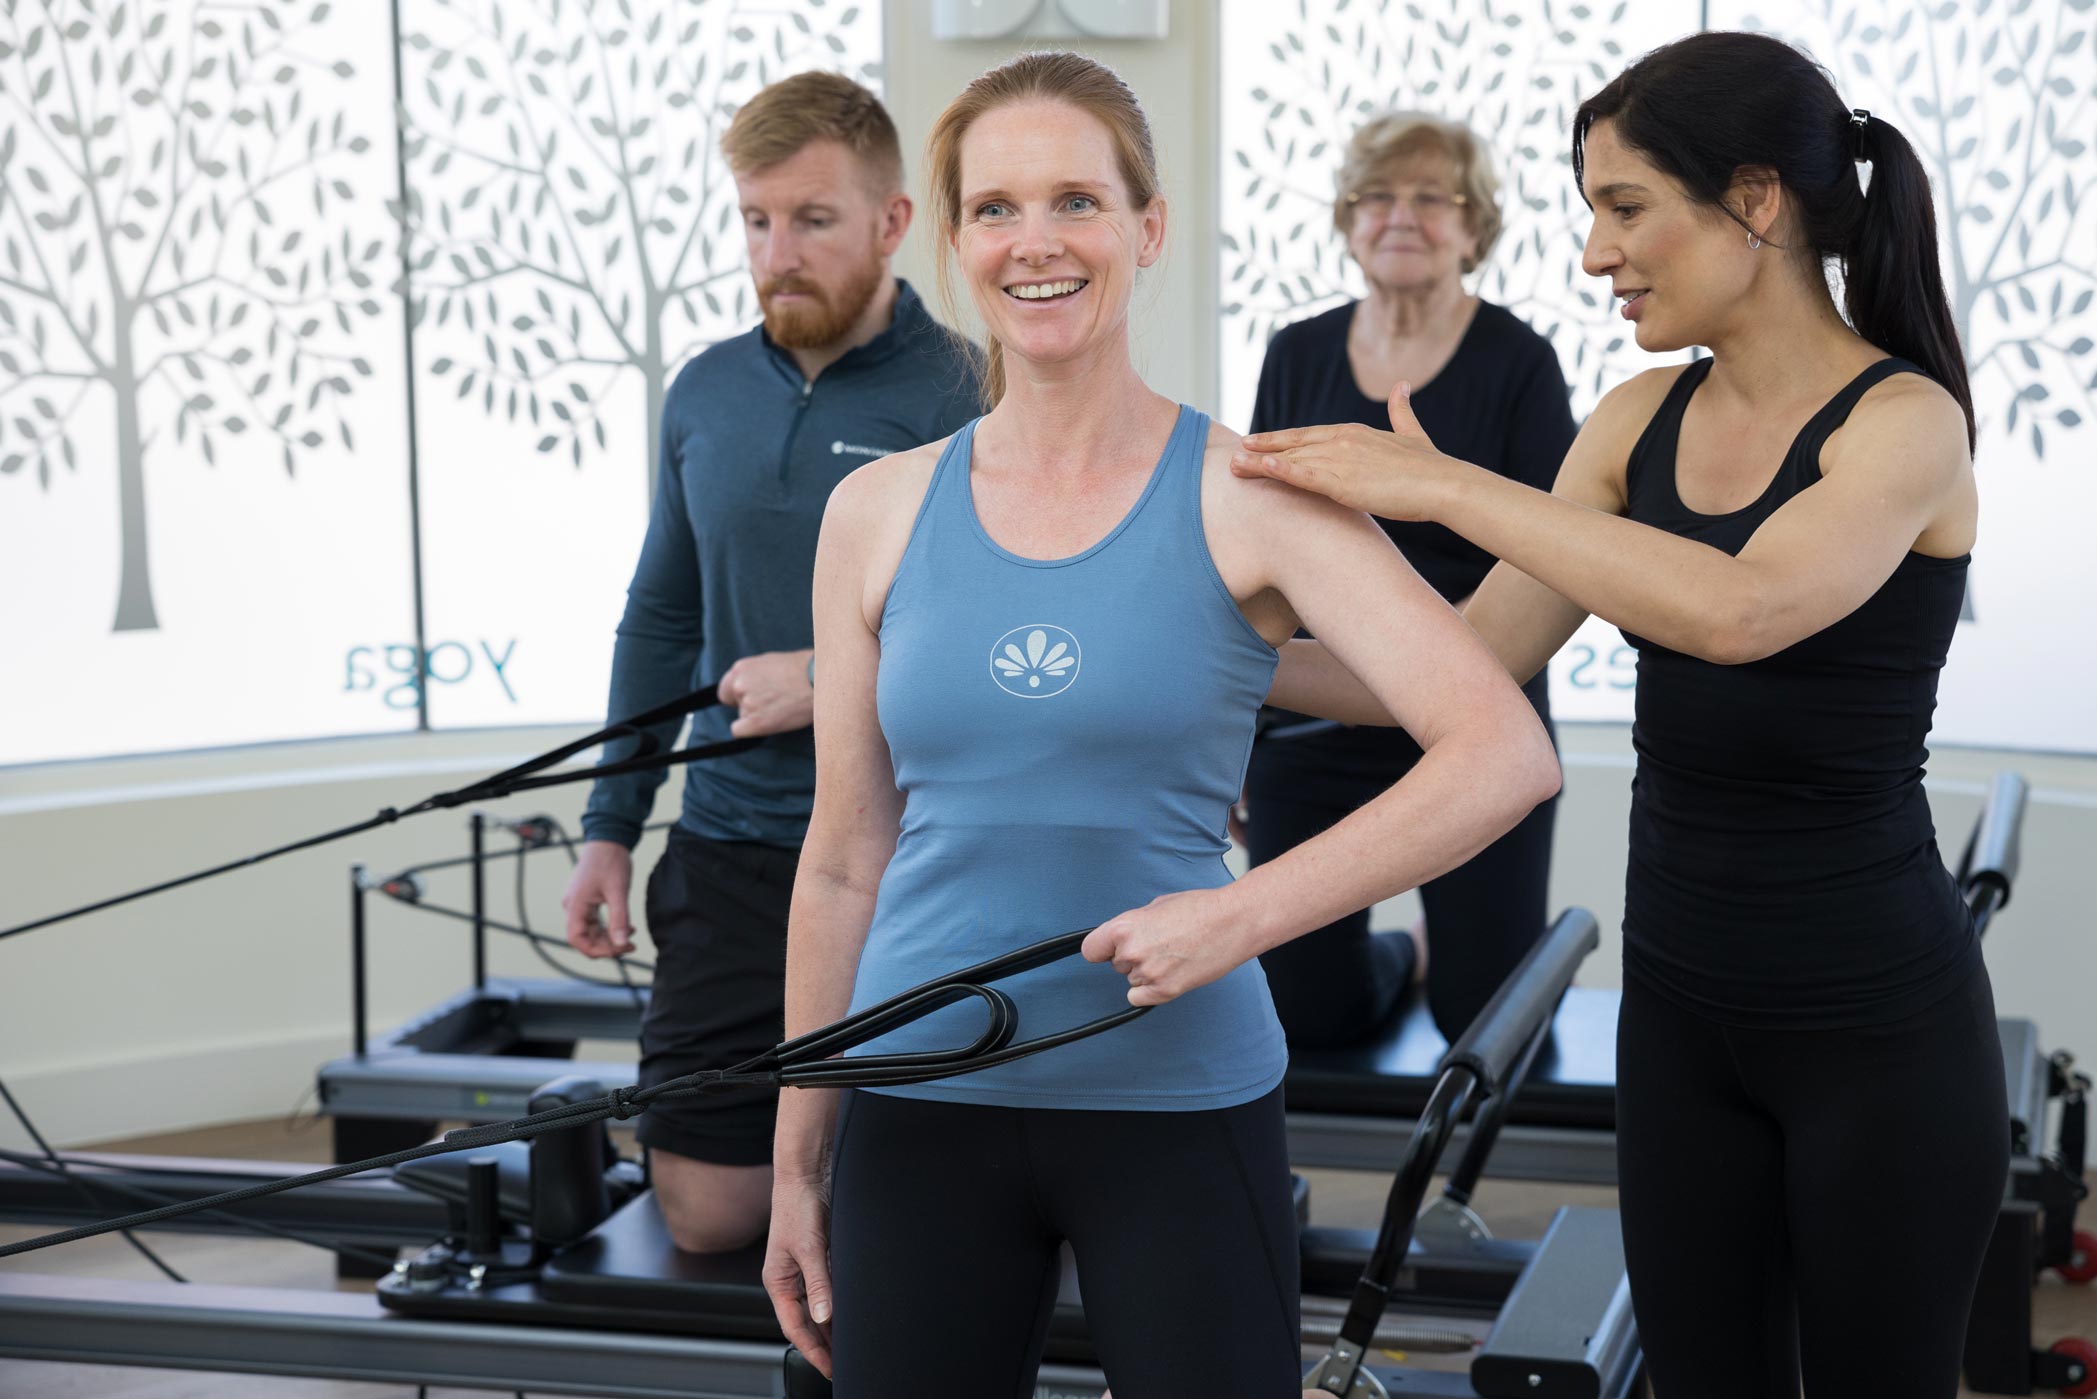 A reformer pilates class at an exercise studio in Balham, London during a health & fitness personal branding photography shoot